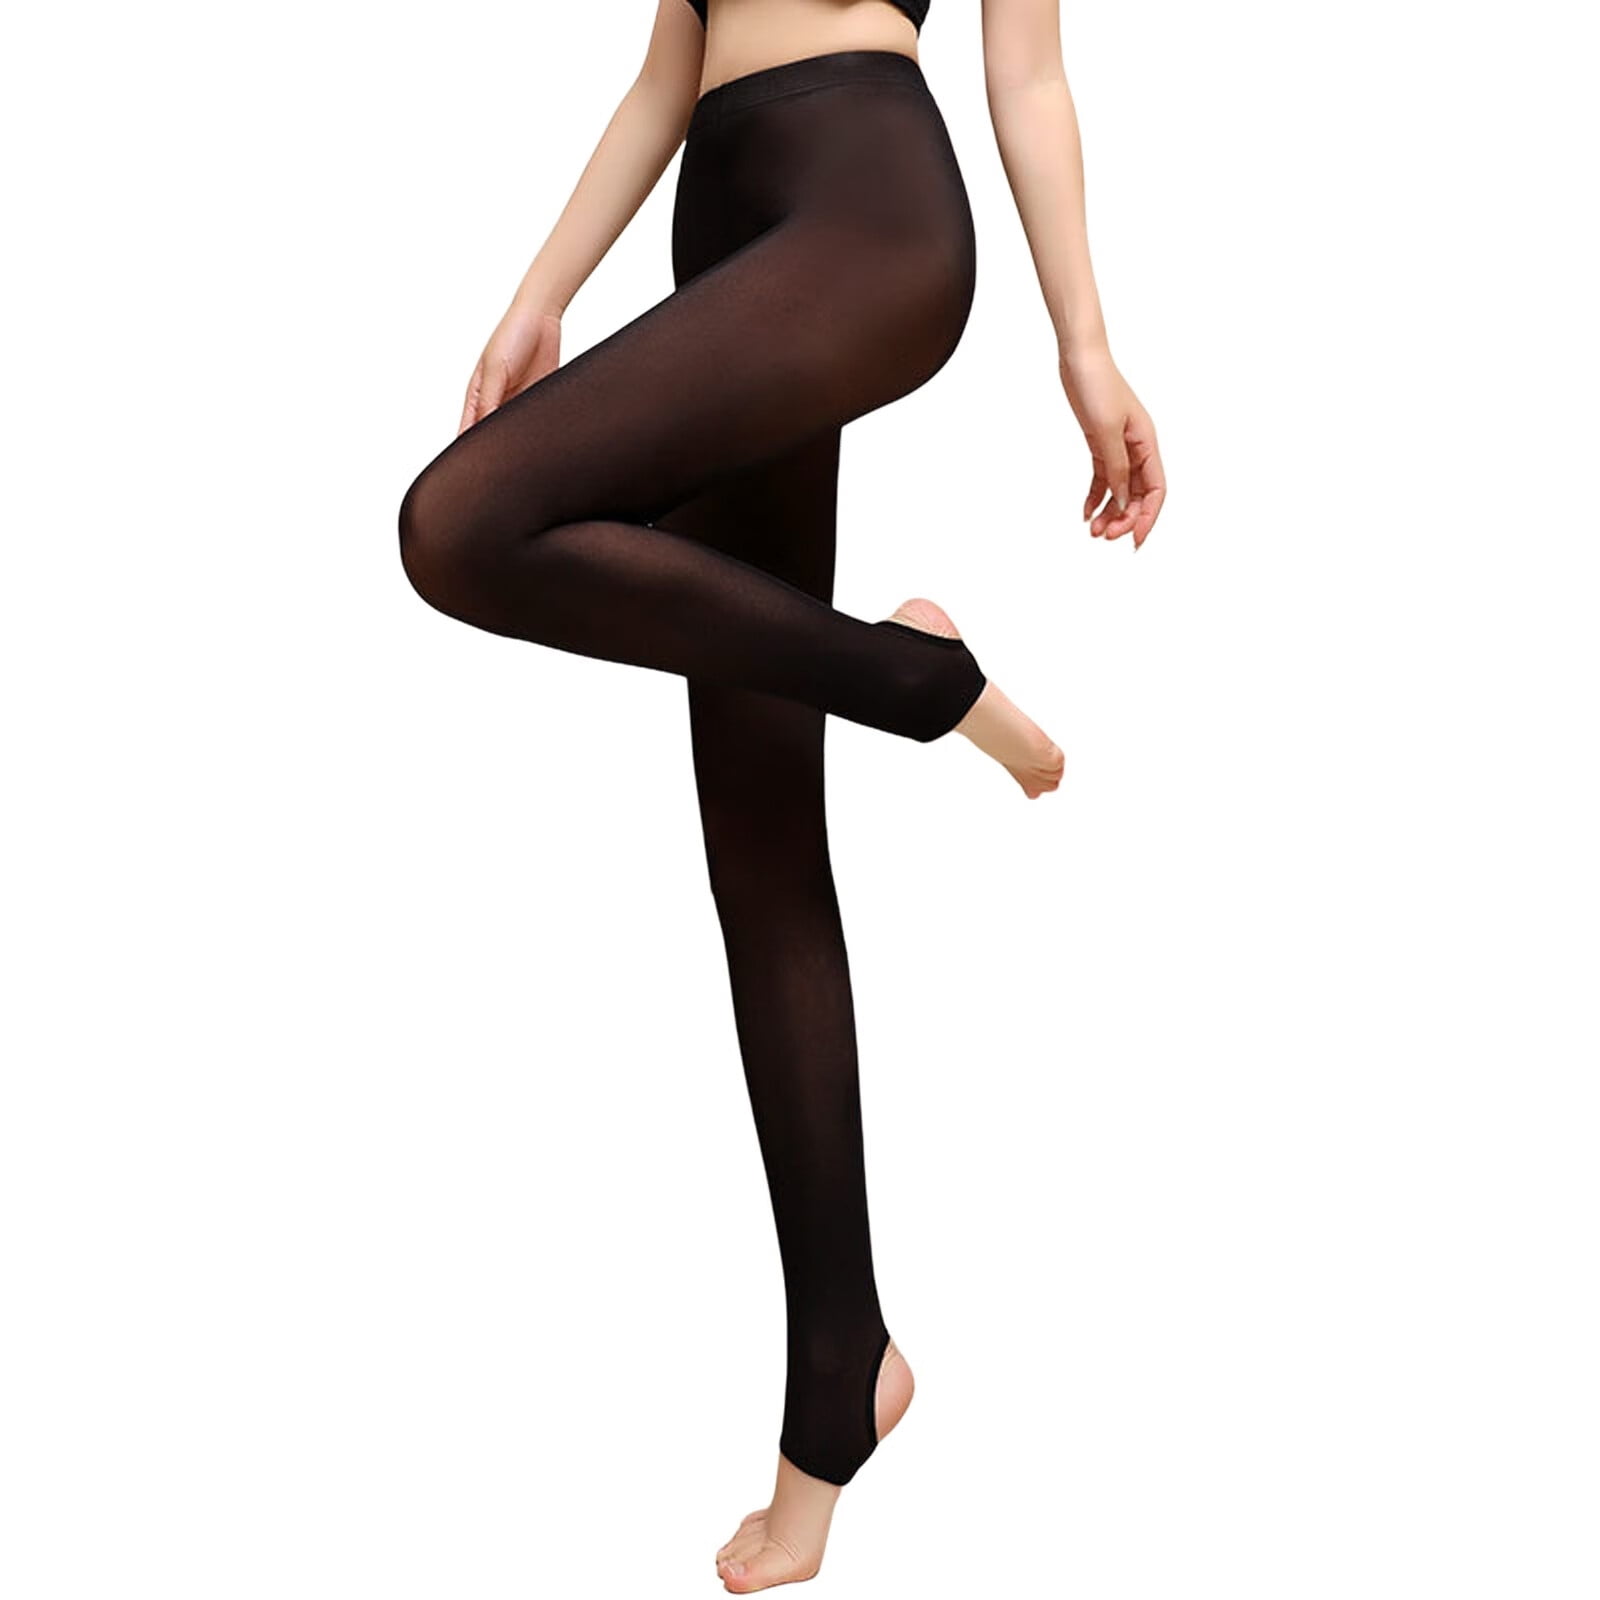 Unittype 3 Pairs Fleece Lined Tights 220g Women Sheer Warm Pantyhose Faux  Translucent Thermal Fleece Tights Warm Tights (Black,One Size) at   Women's Clothing store